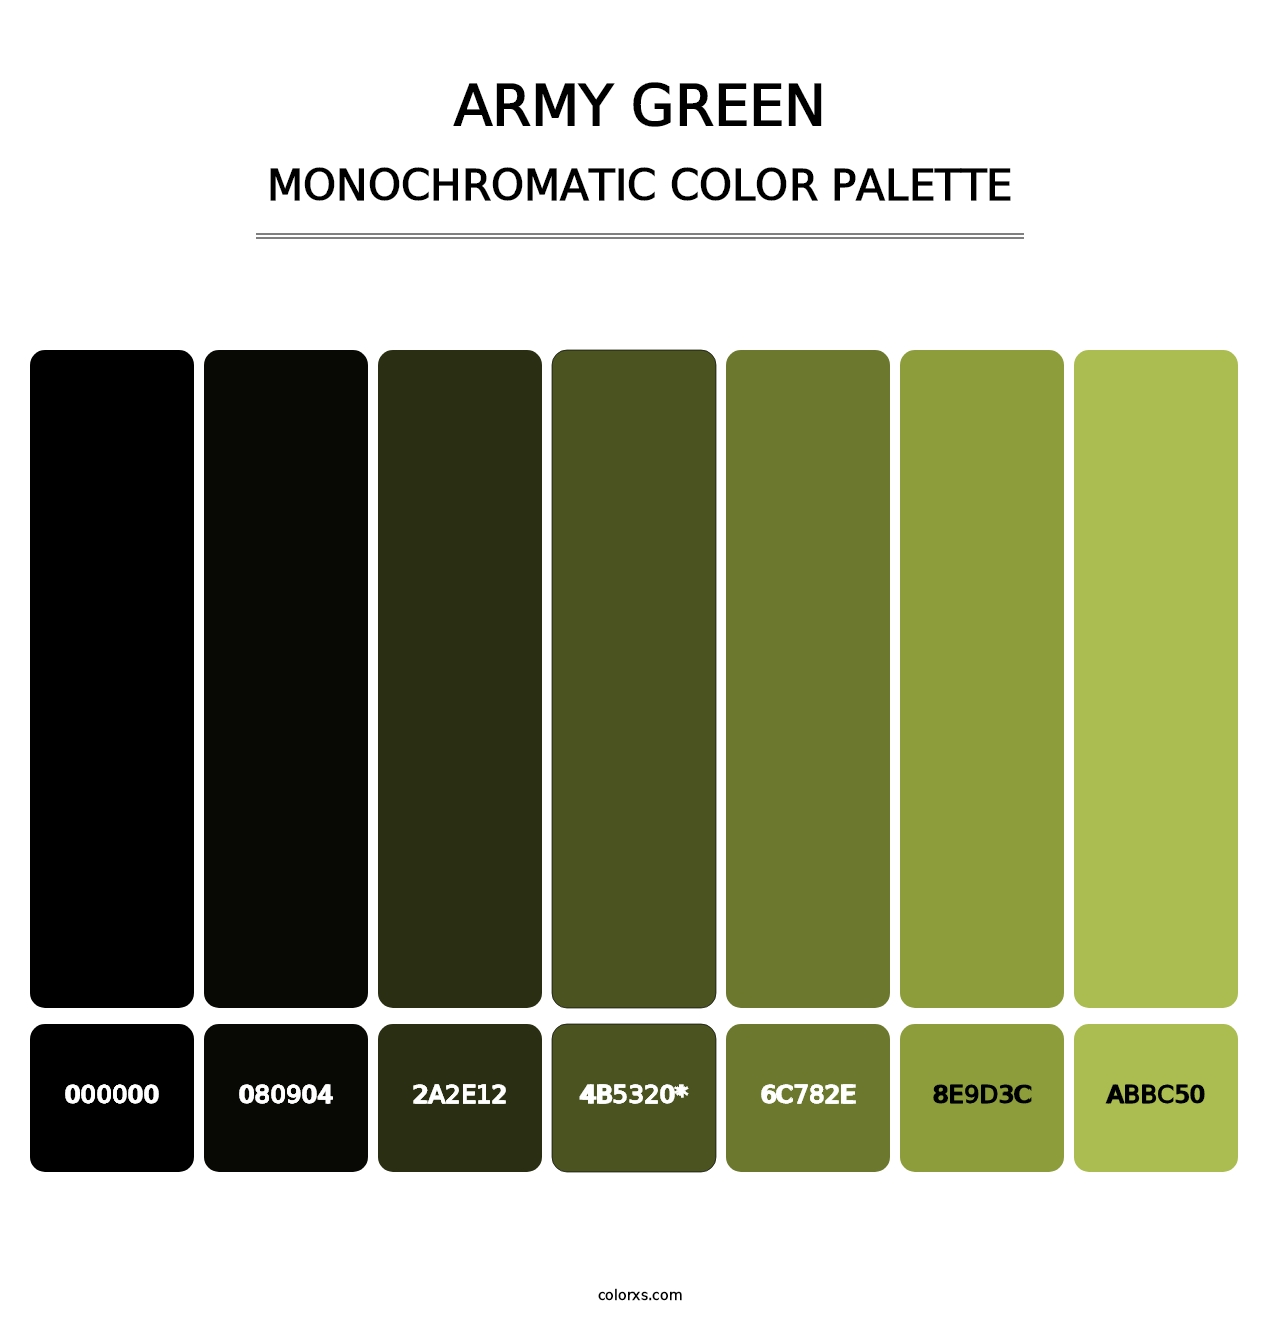 Army Green - Monochromatic Color Palette